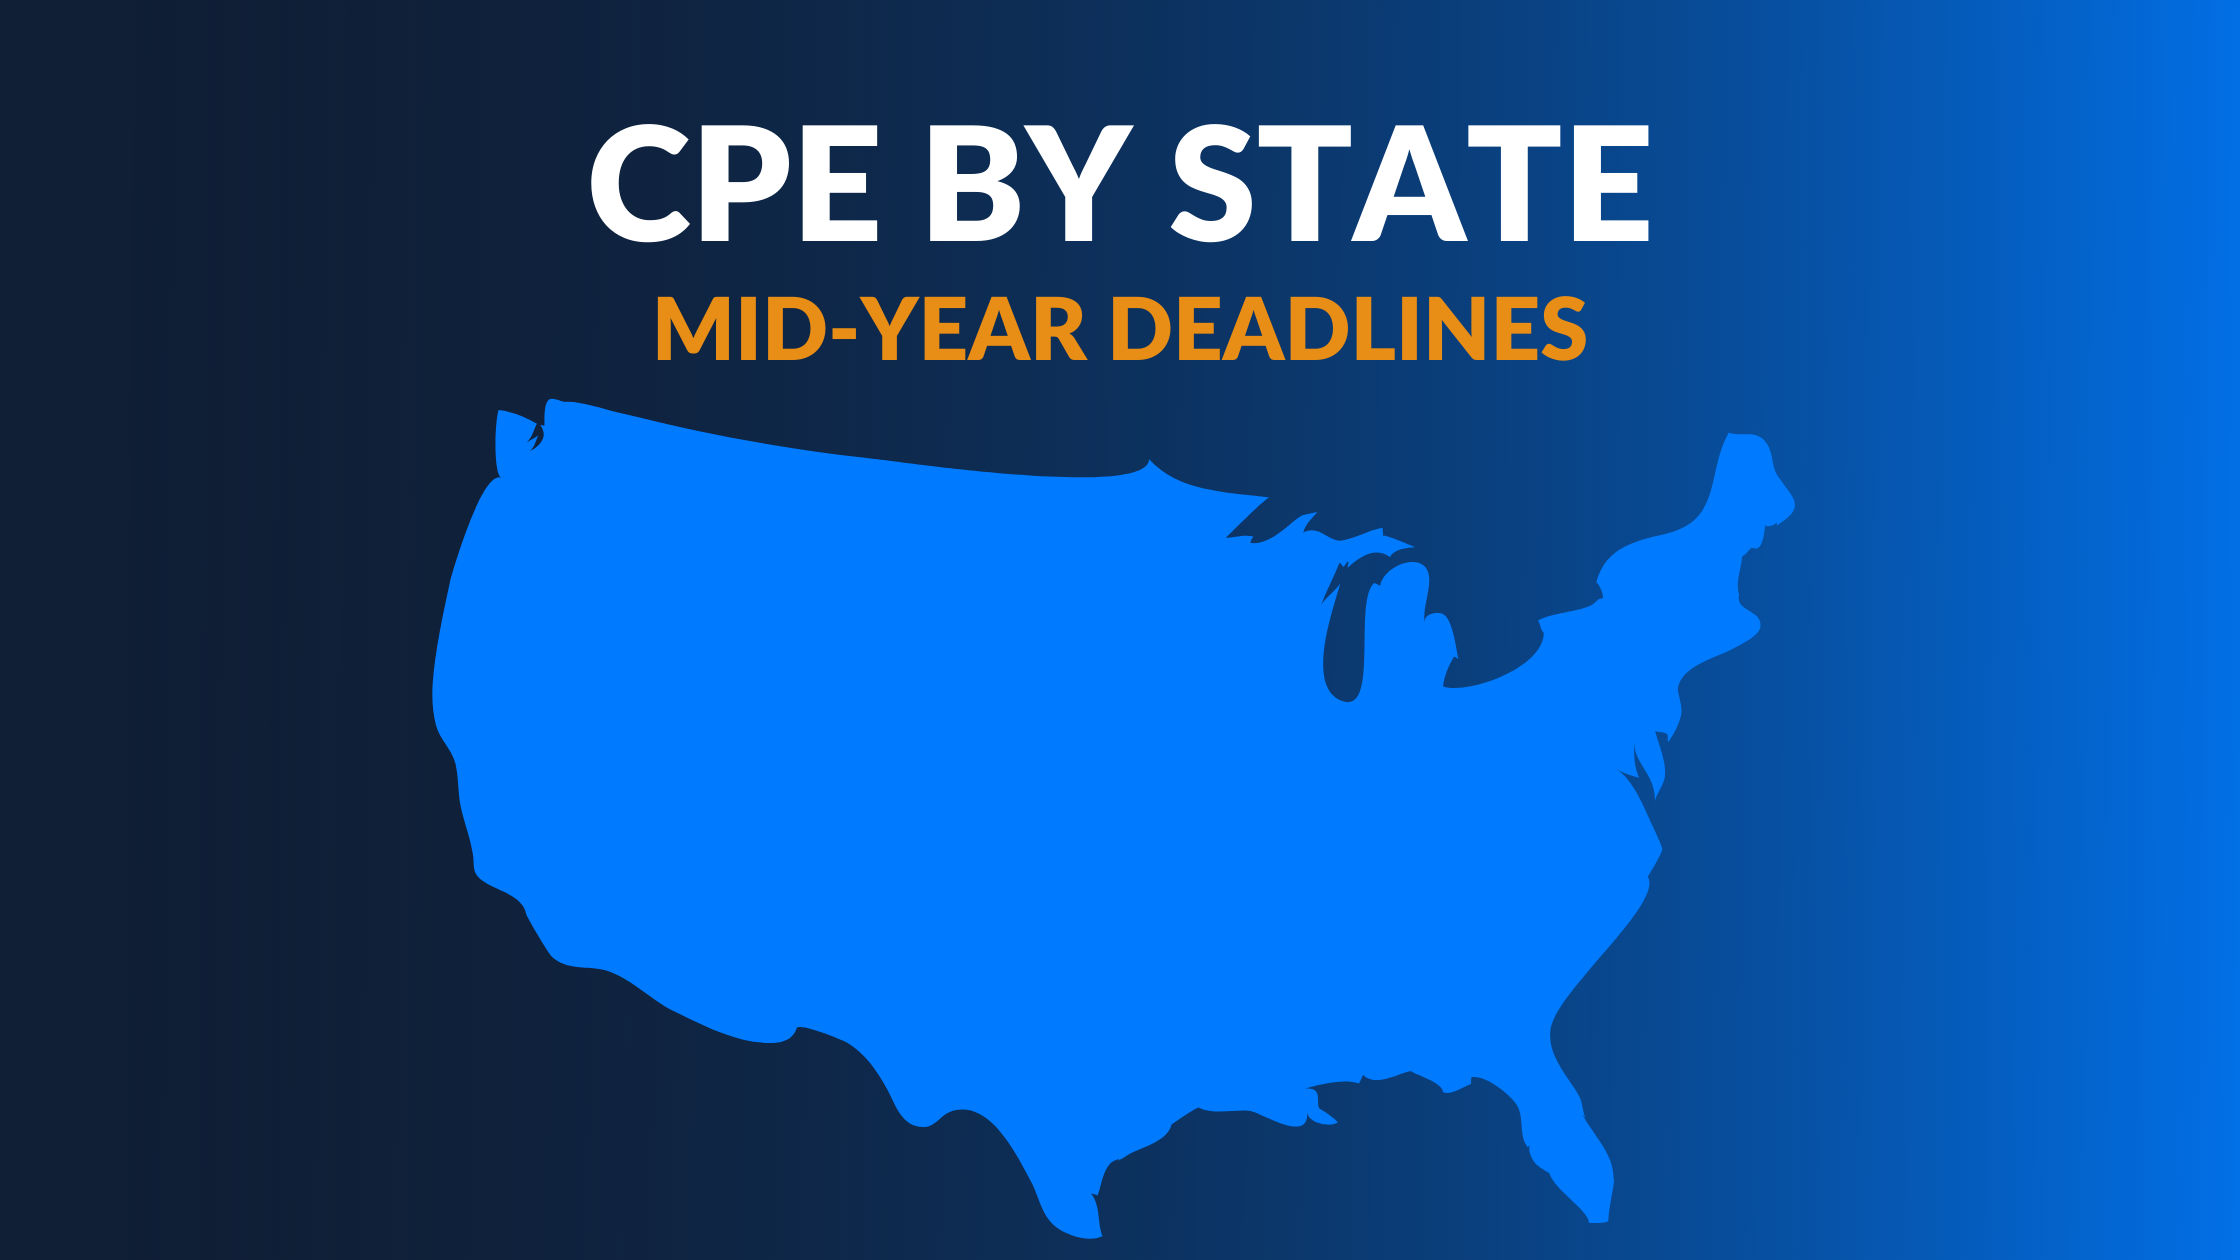 Mid-Year CPE Deadlines by State